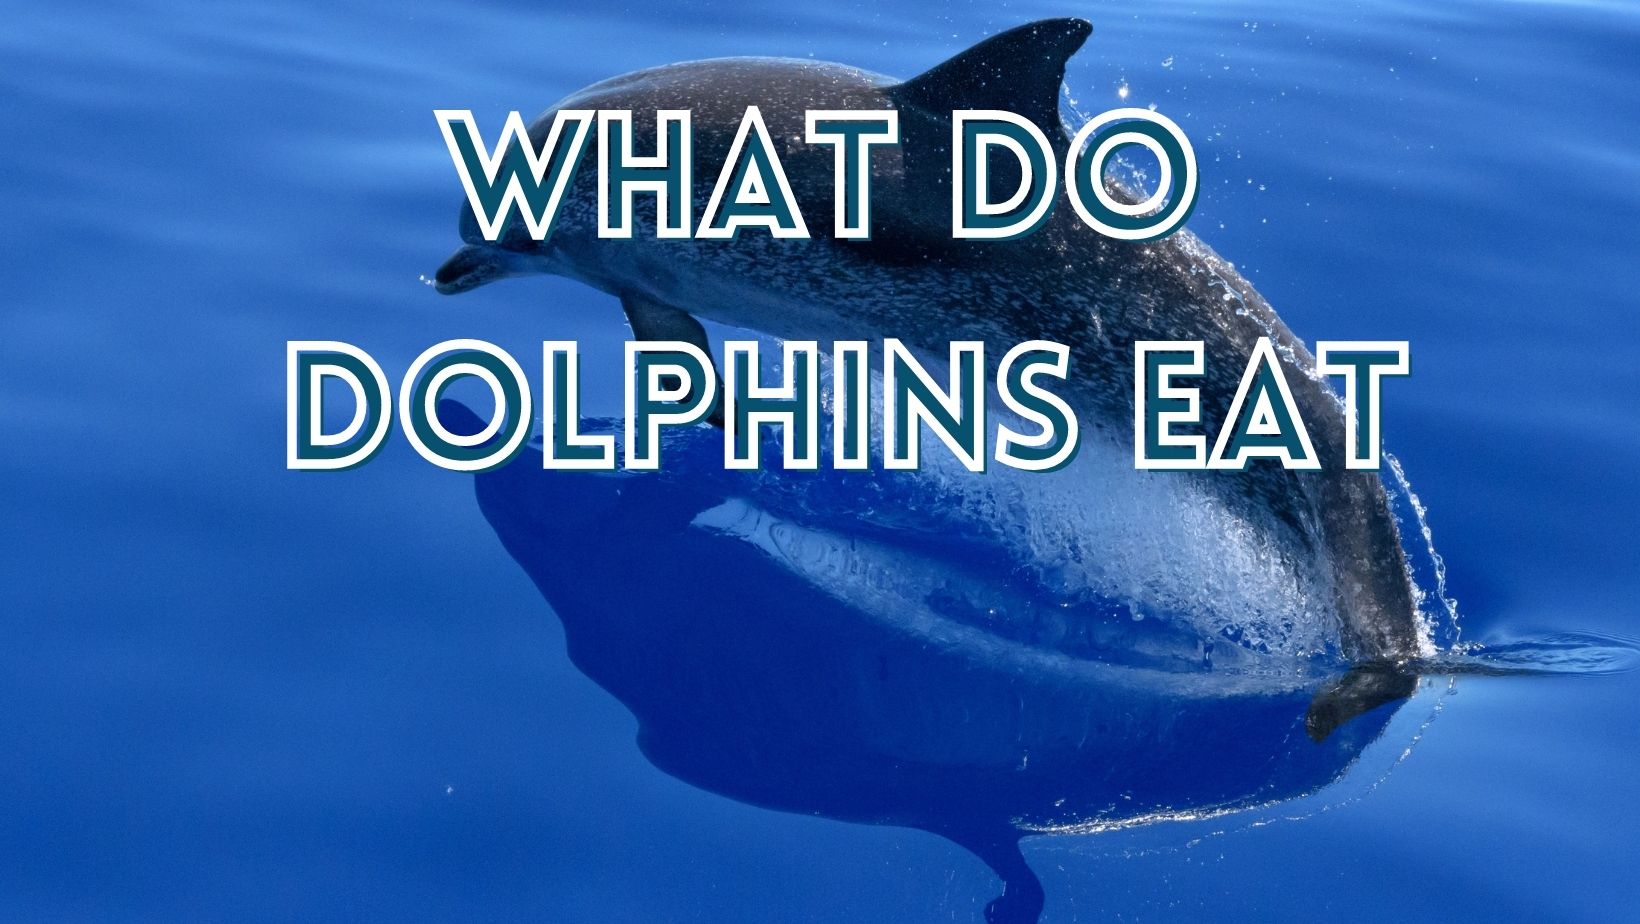 What do dolphins eat